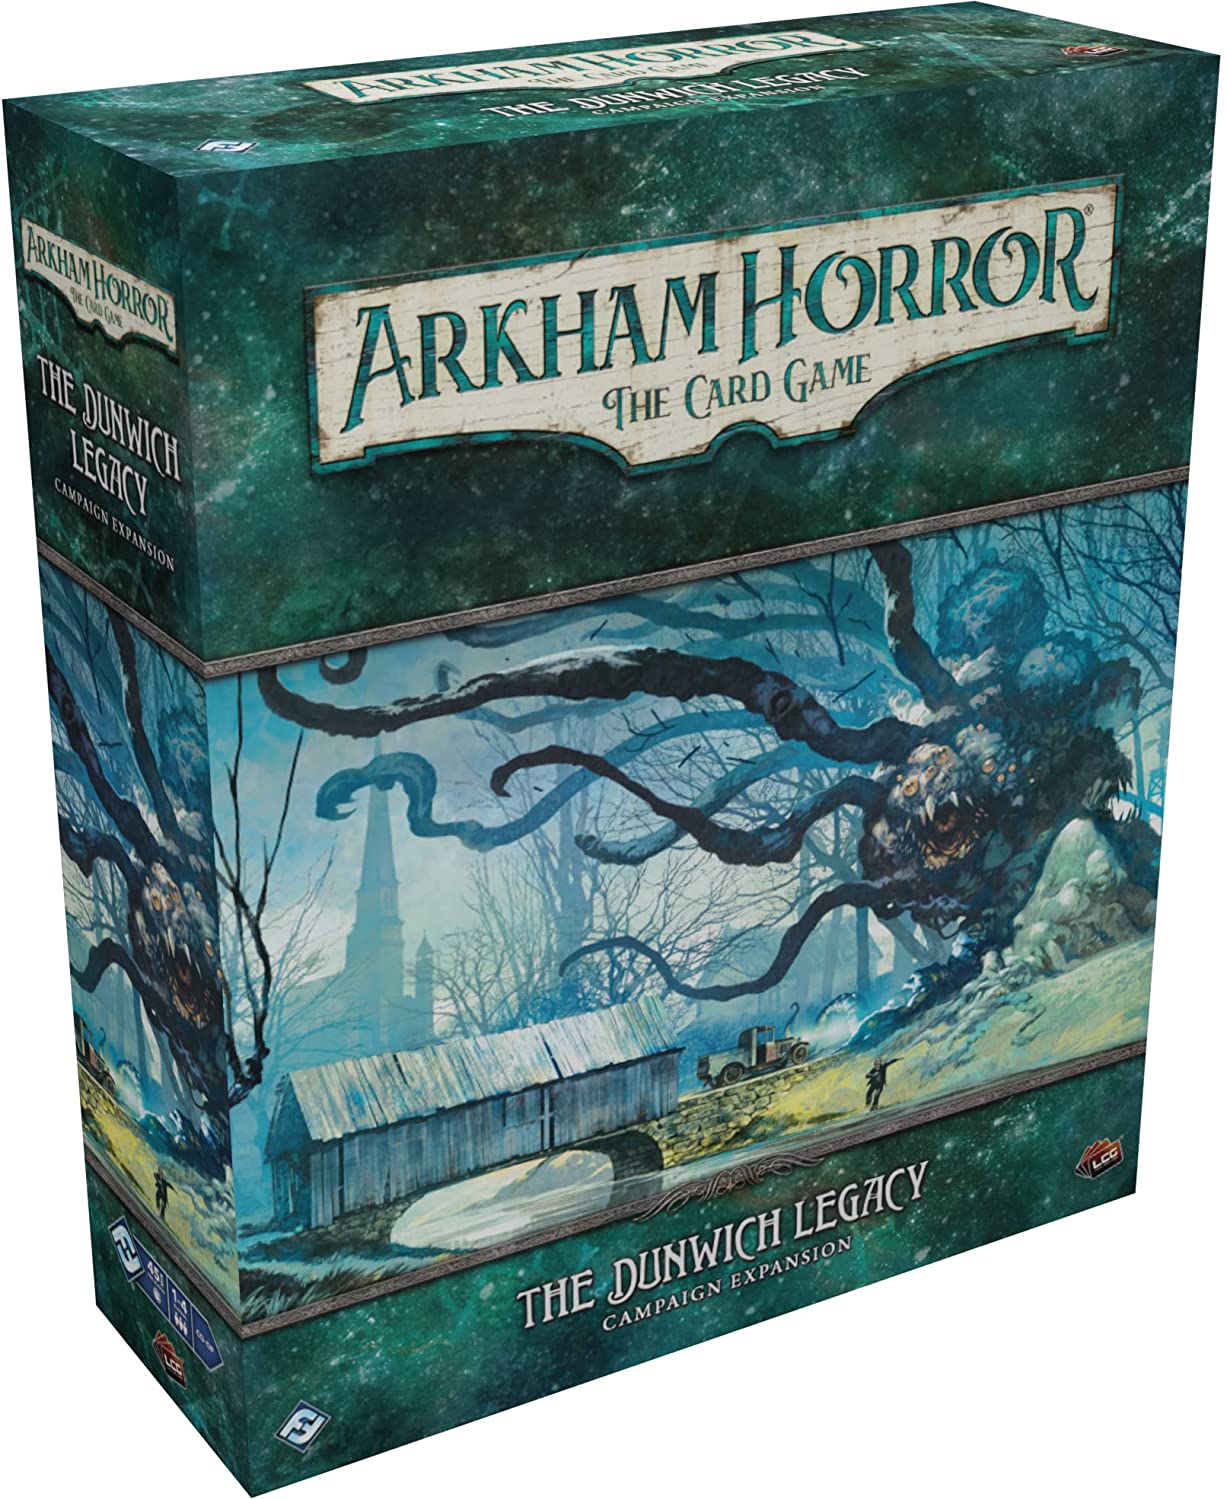 Arkham Horror The Card Game - The Dunwich Legacy Campaign Expansion